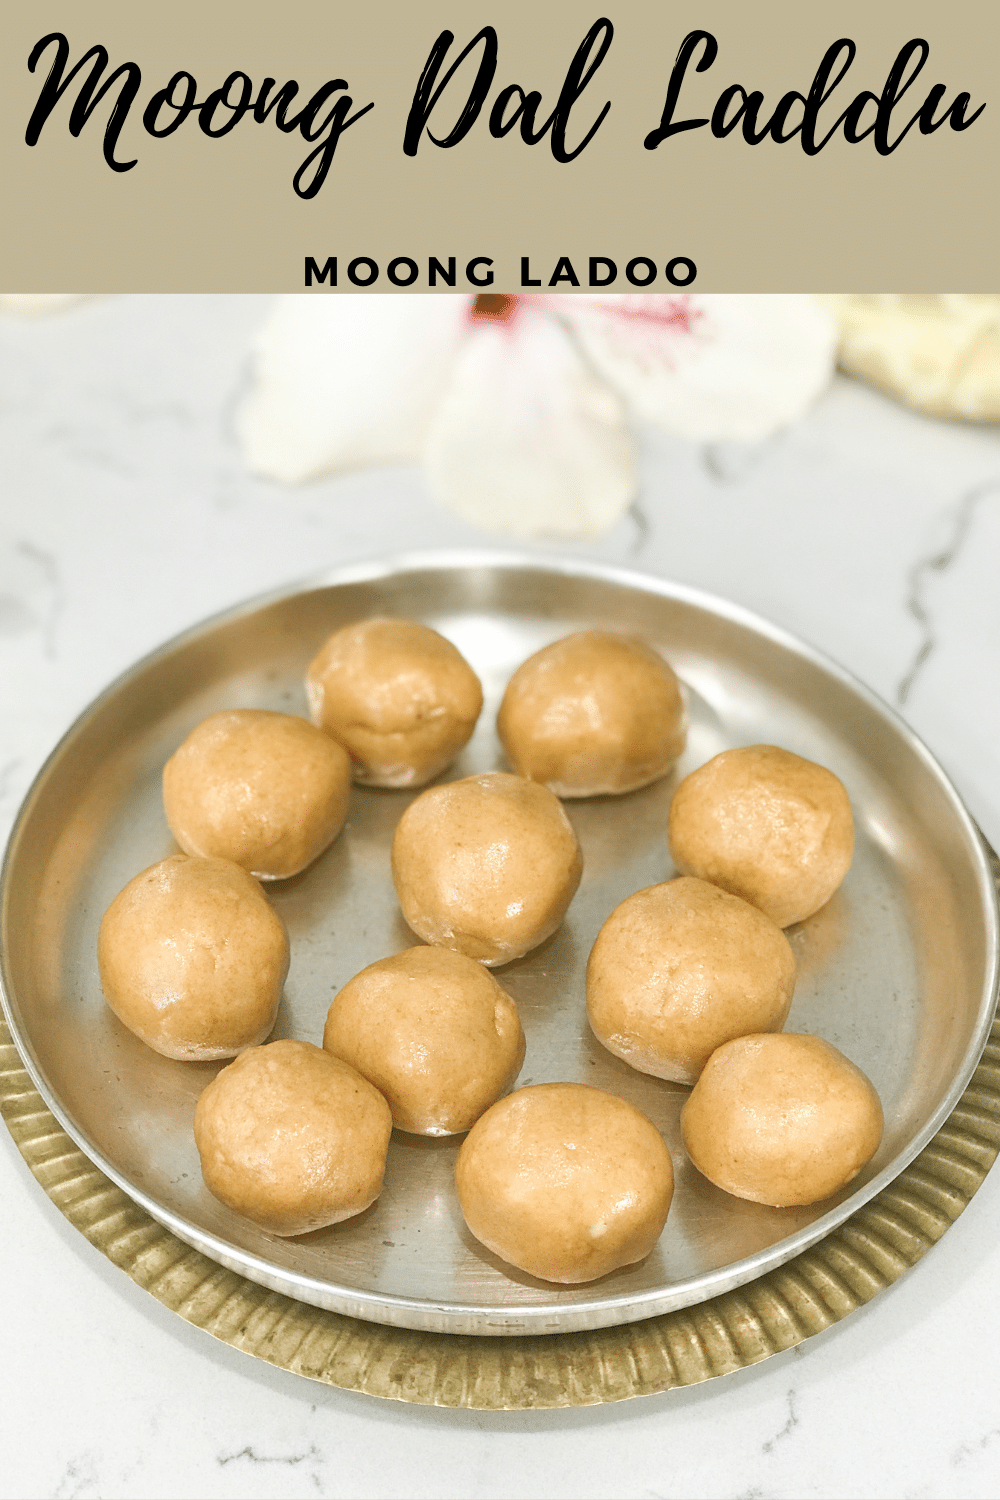 A silver plate filled with Moong laddu